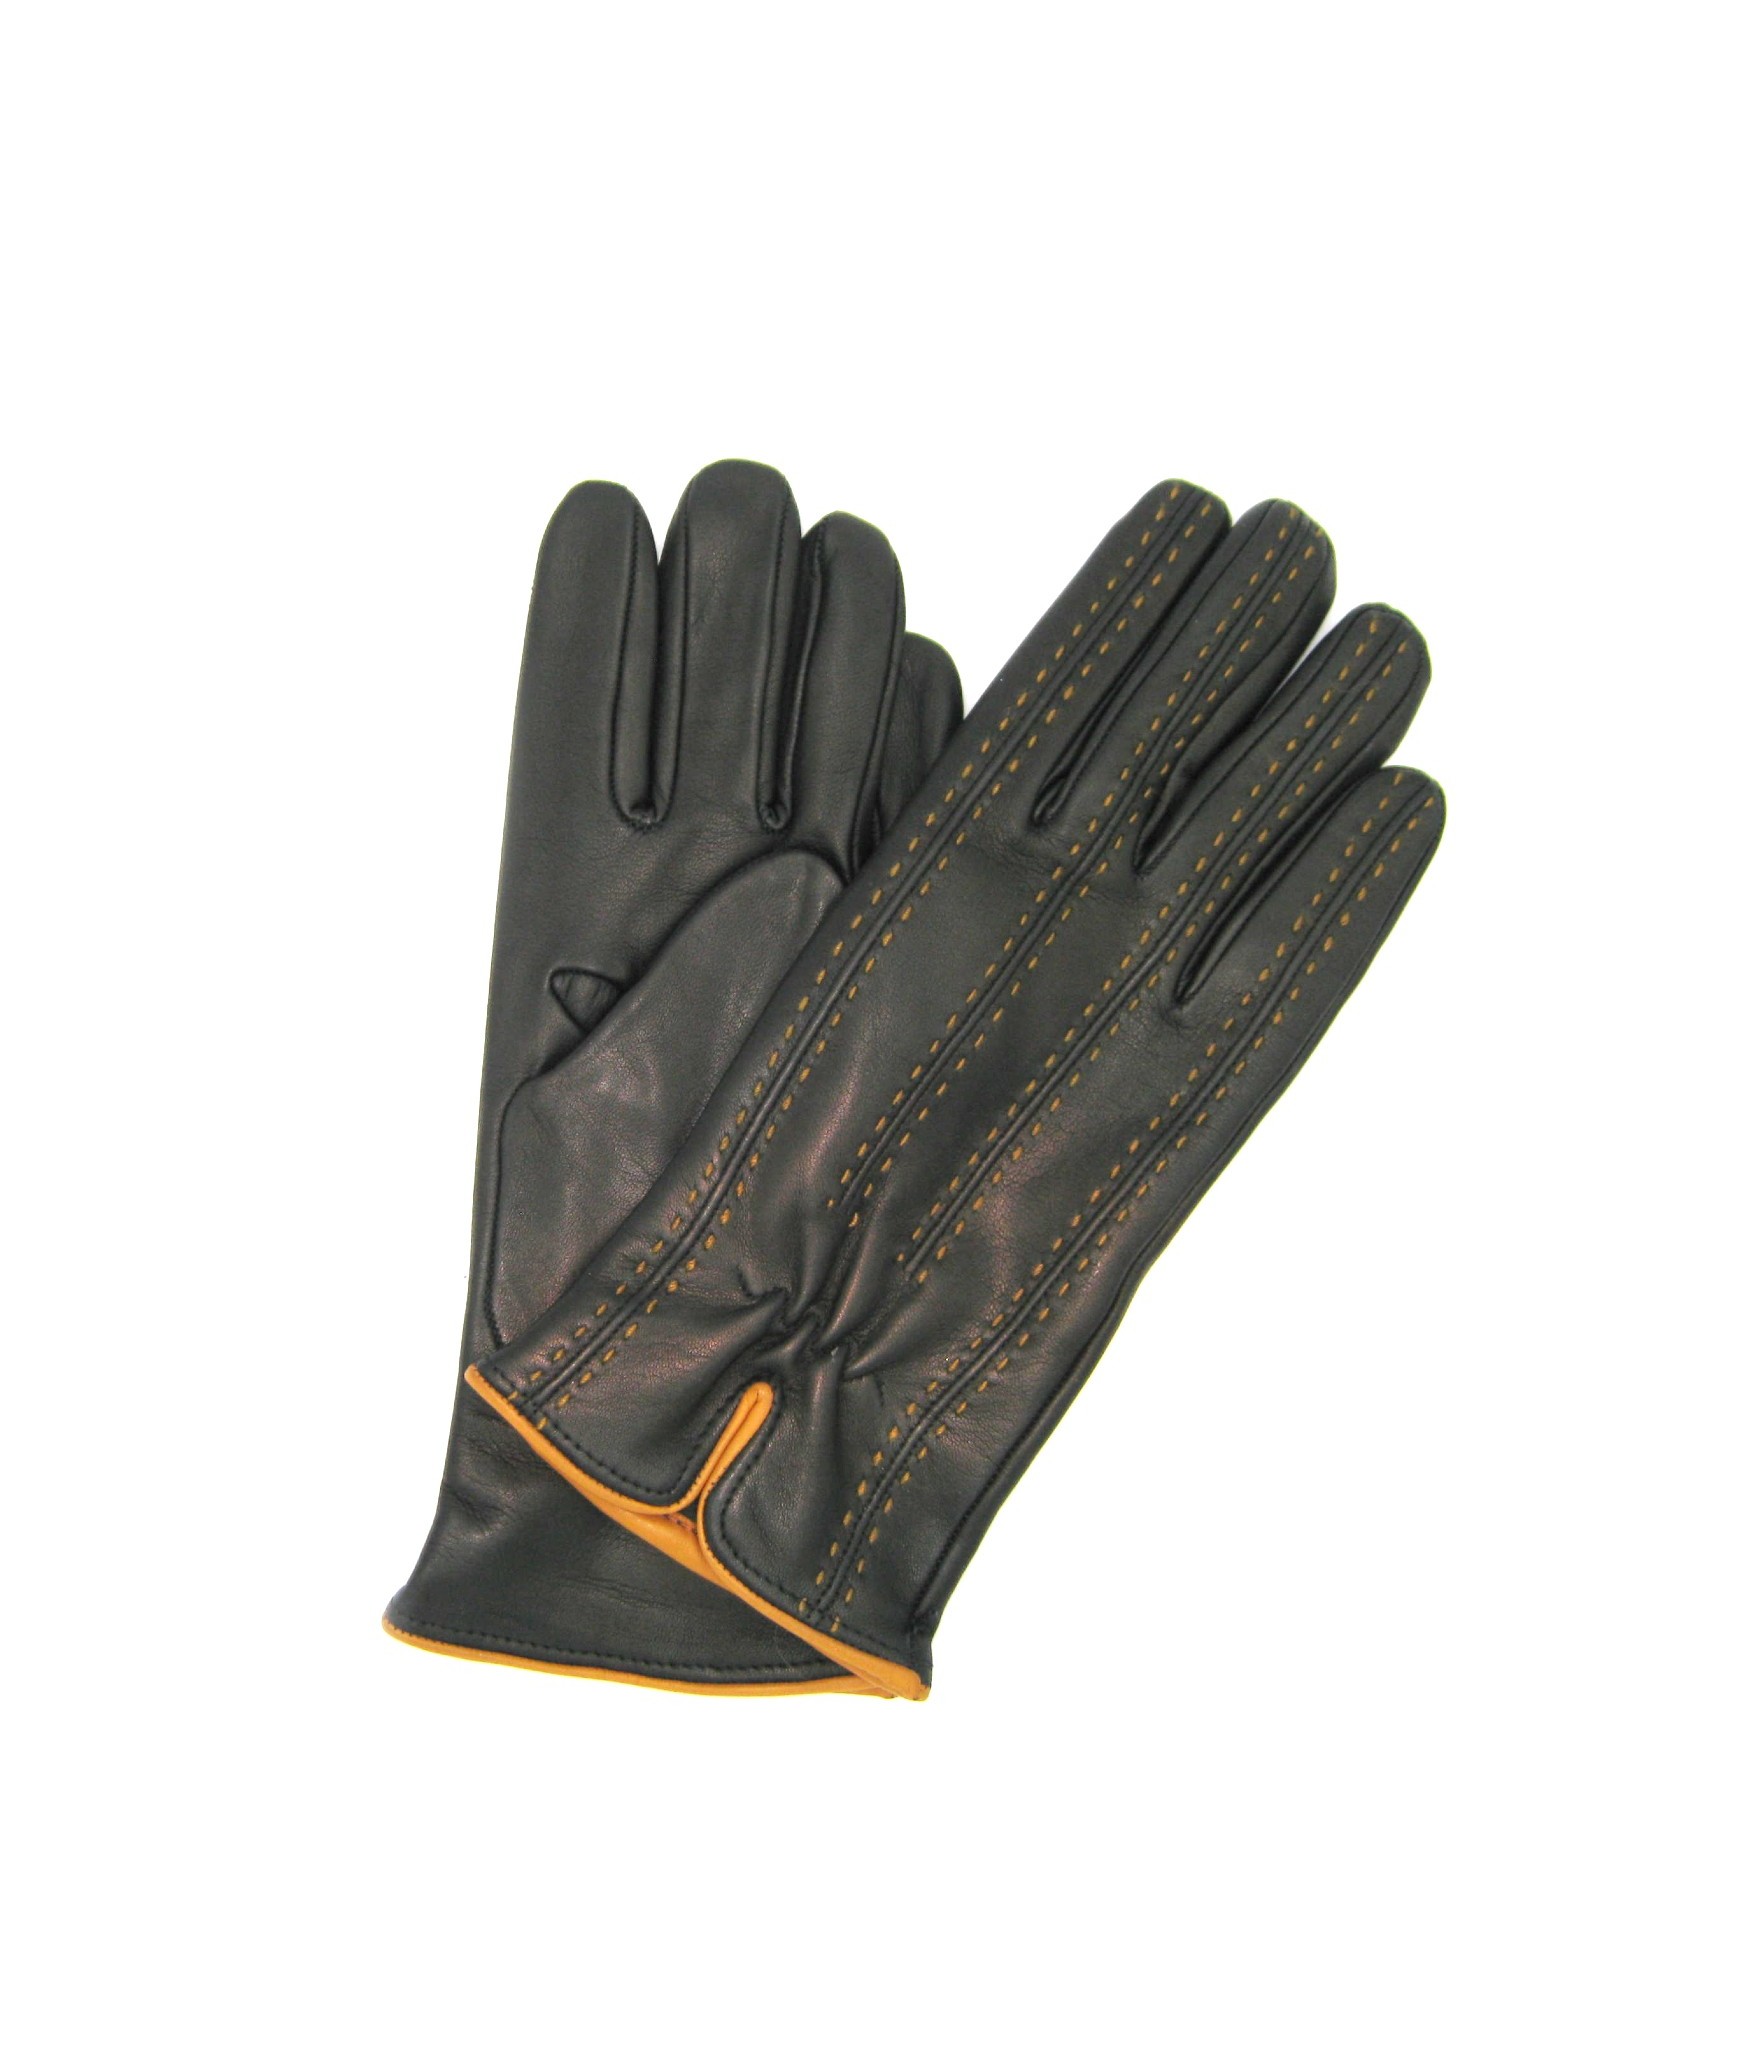 Nappa leather gloves with contrast stitching   Black/Camel